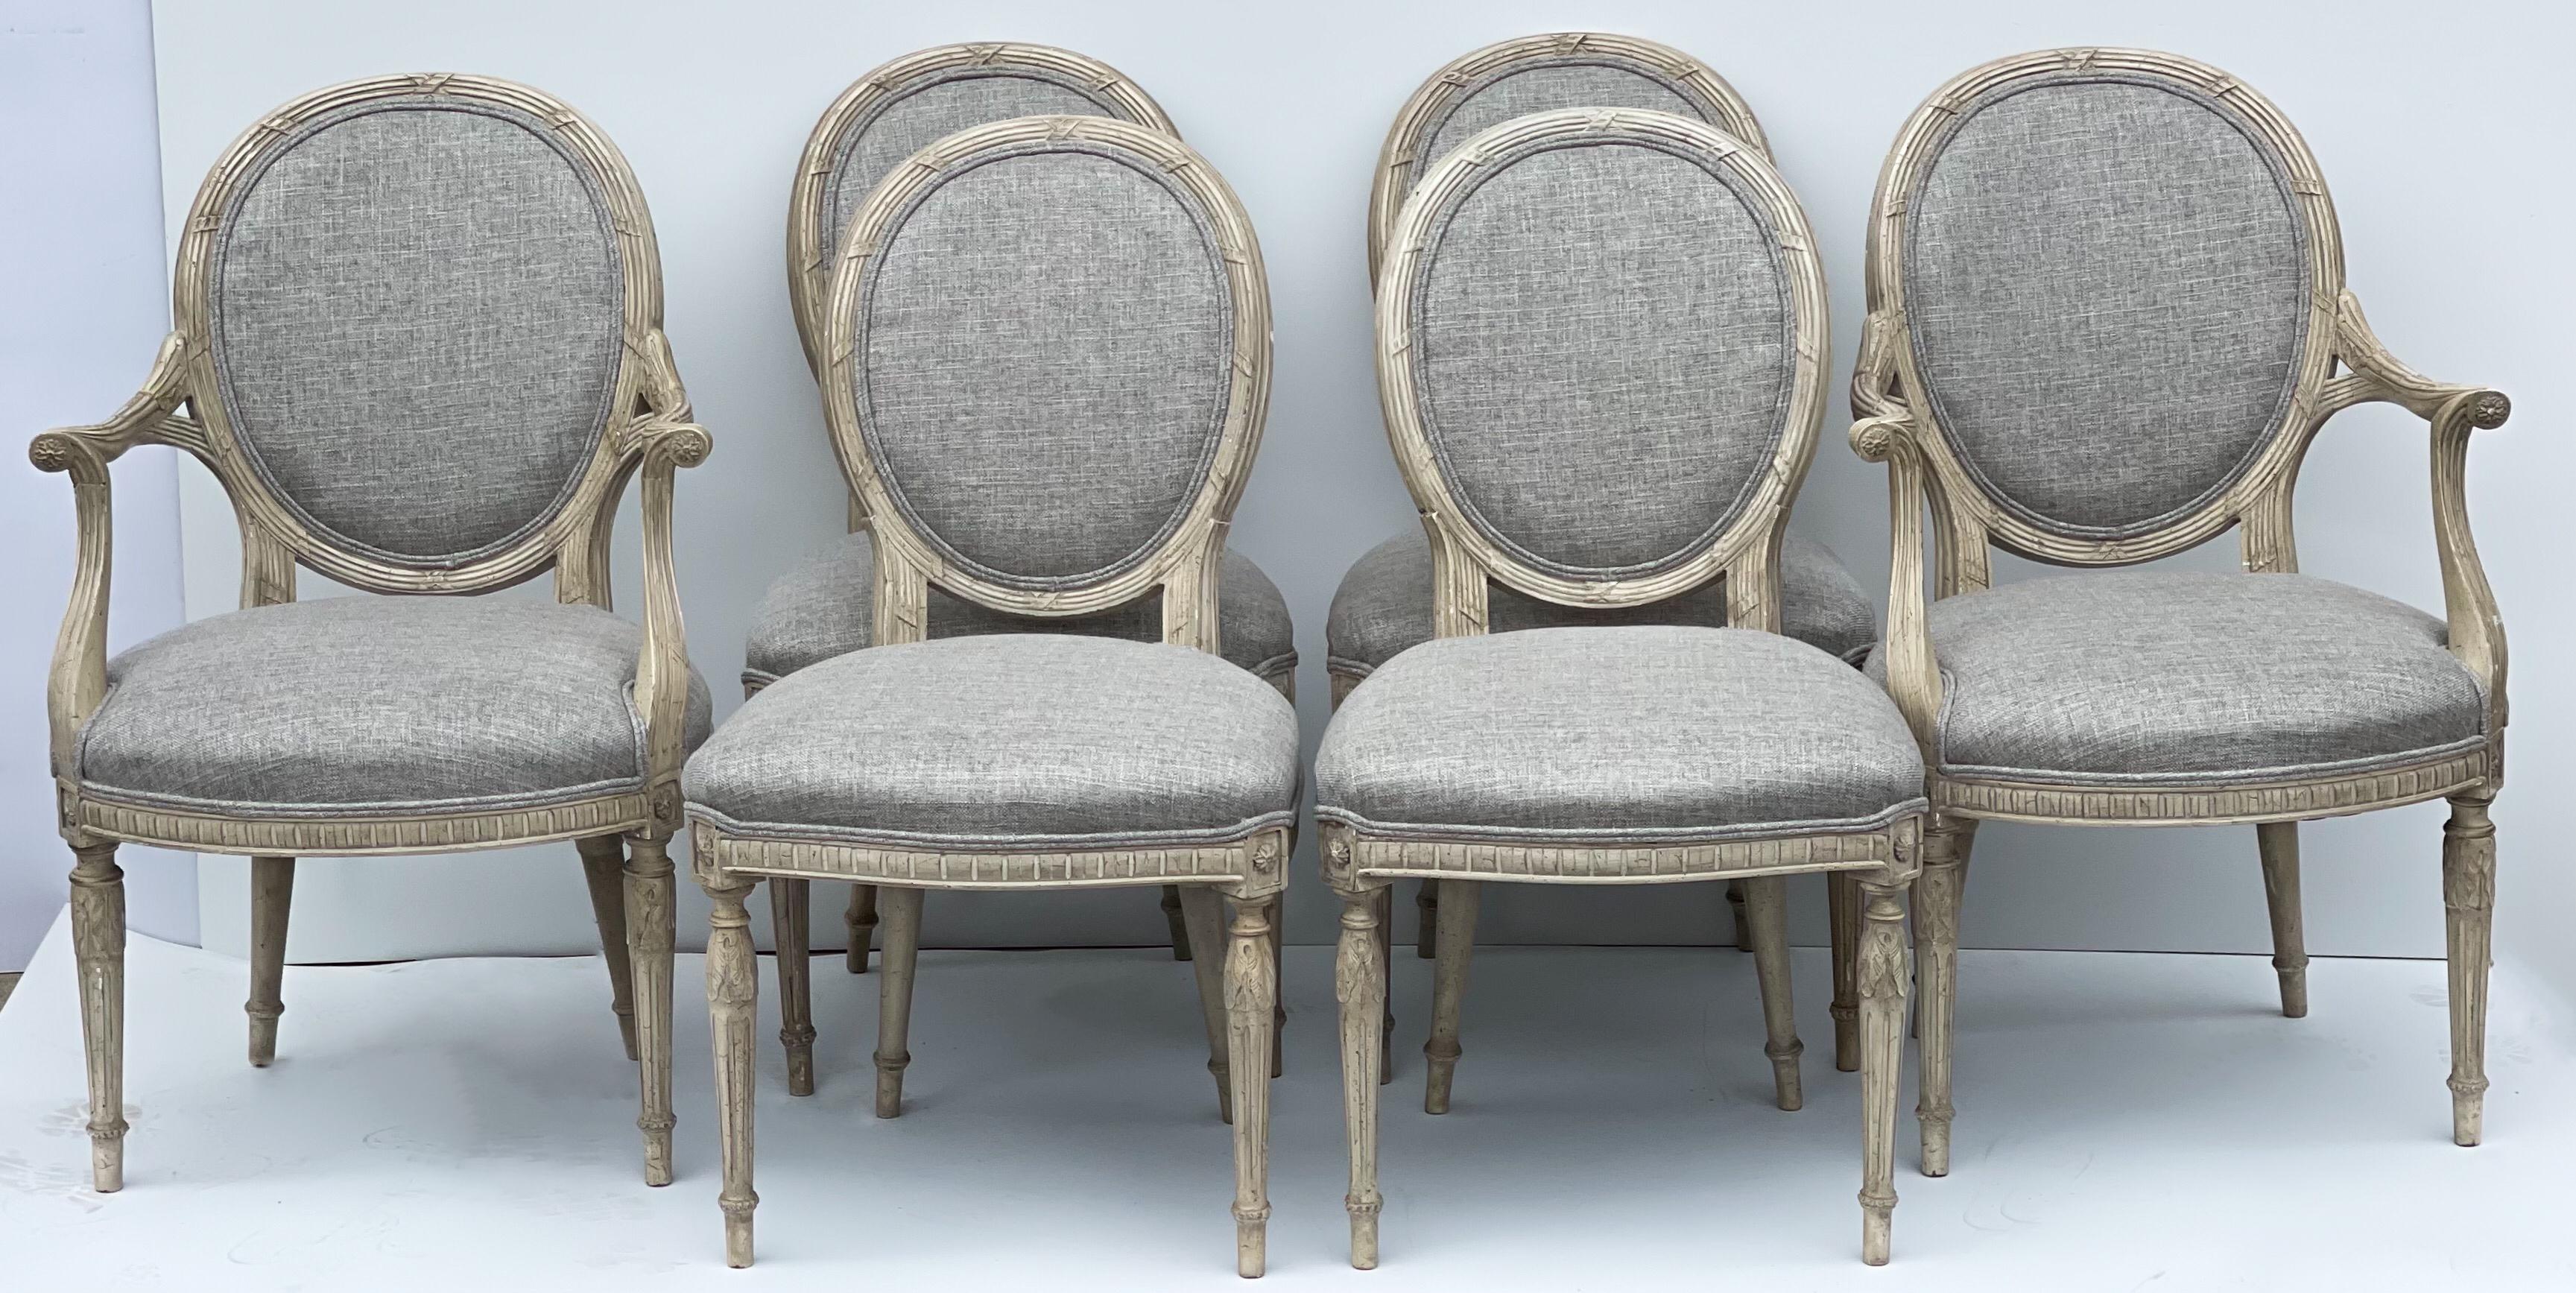 This is a lovely set of six regency style carved dining chairs by Beacon Hill. The carved frames have wonderful detail. The upholstery is a new neutral linen. The finish is original. 
Side chairs: L 21.5” x 22” W x 36” H. Seat: 19”.